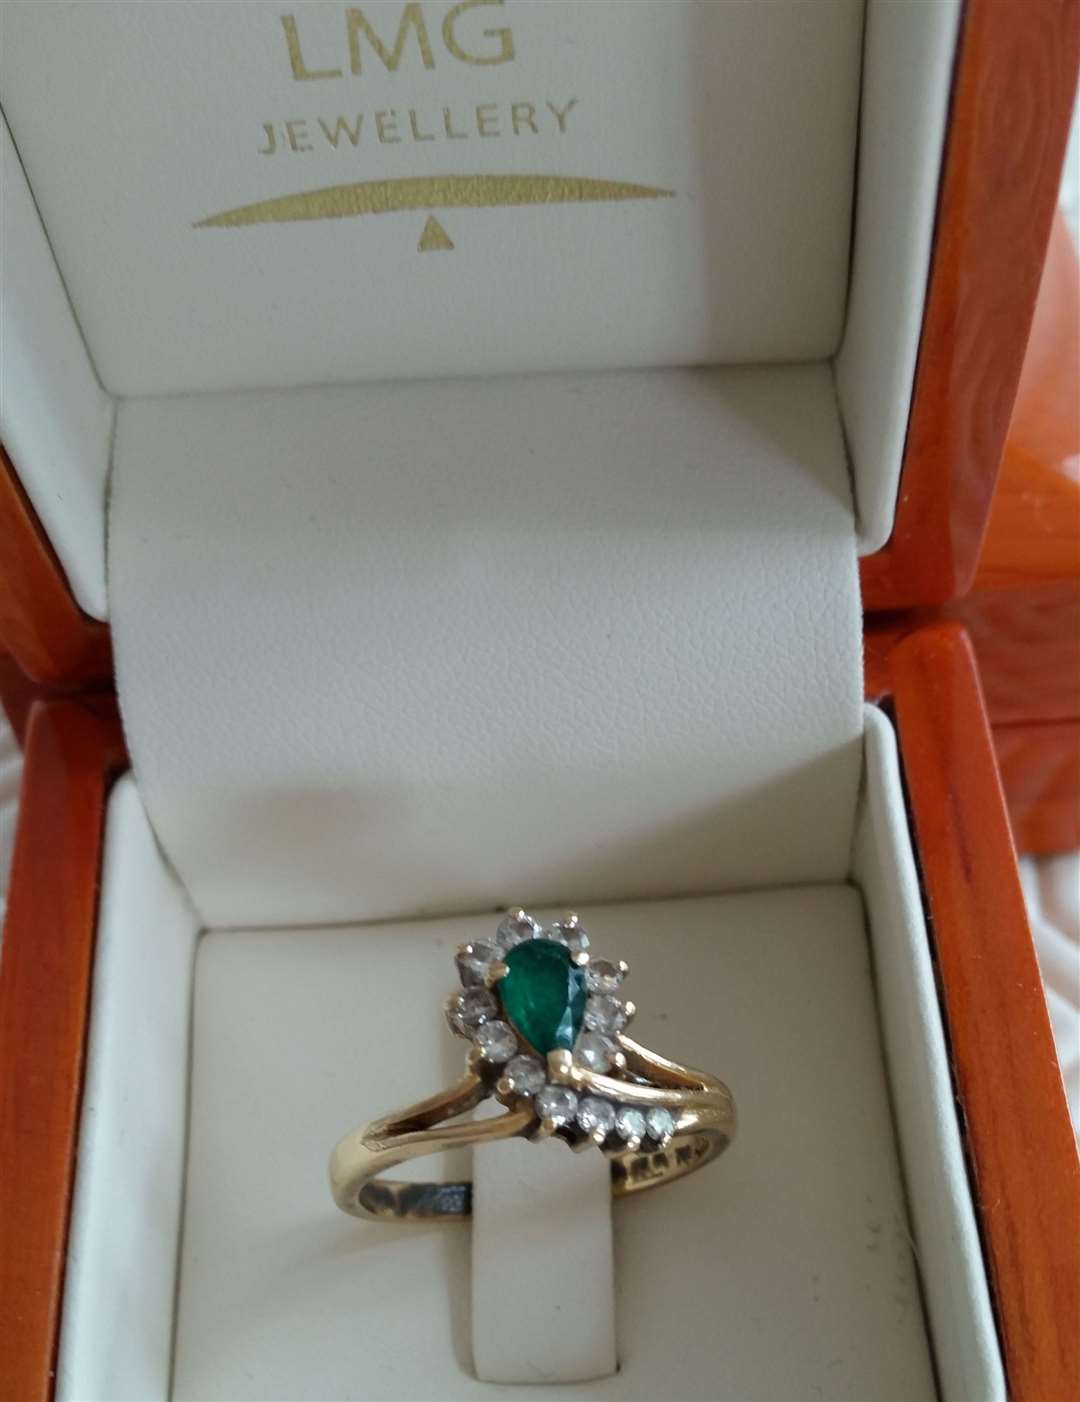 This ring was stolen in the burglary on September 2 Picture: Kent Police